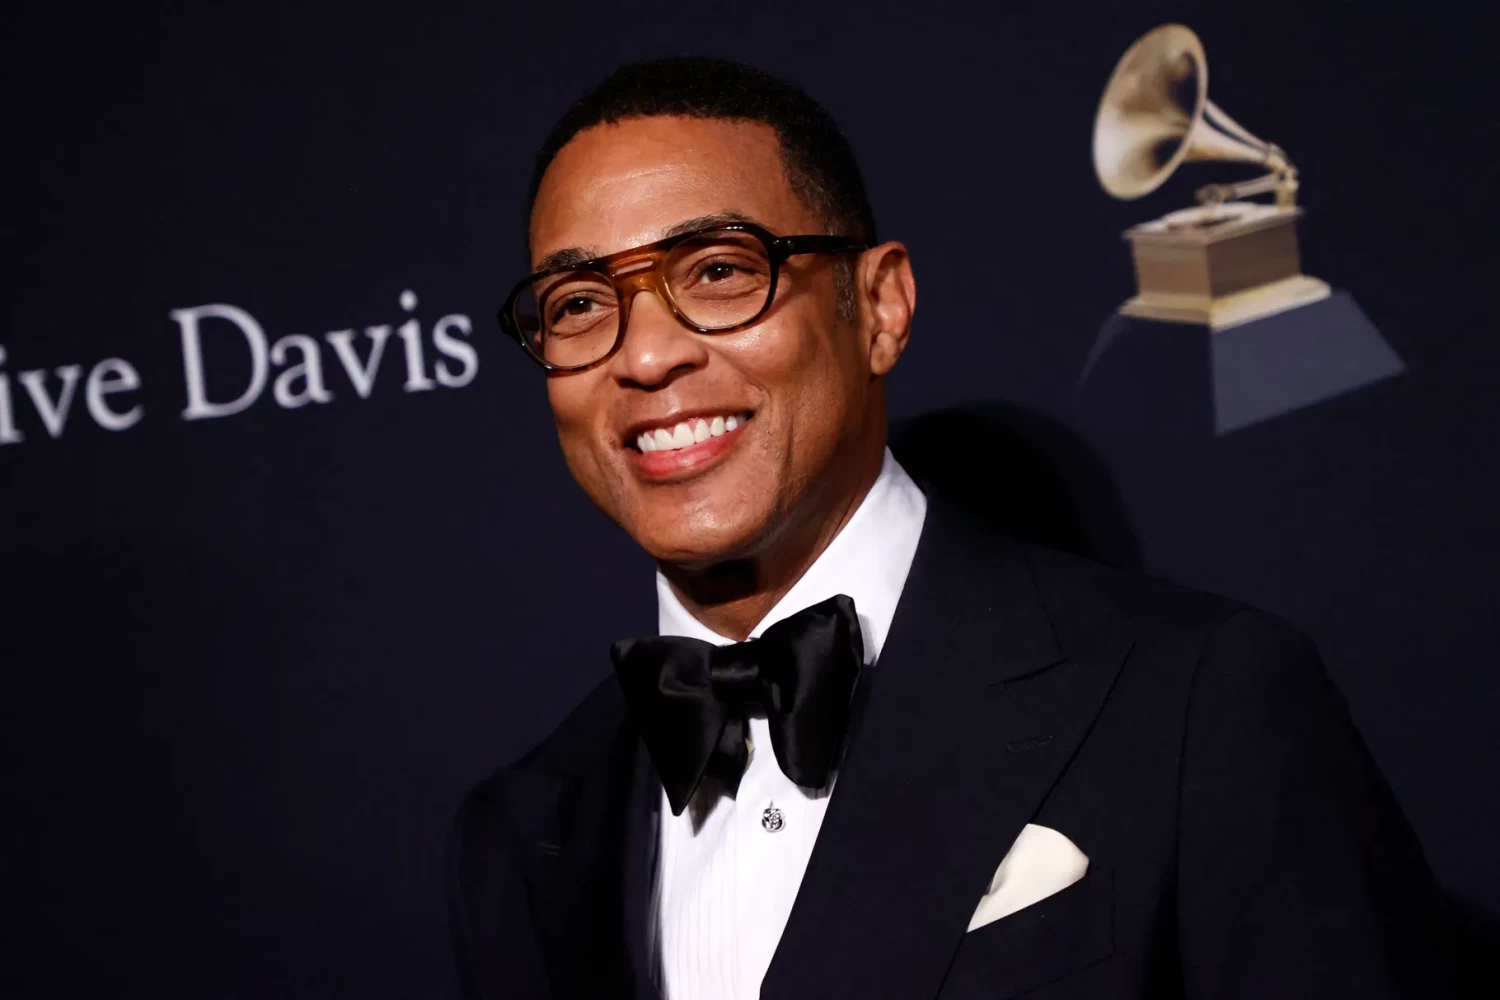 US television journalist Don Lemon arrives for the Recording Academy and Clive Davis pre-Grammy gala at the Beverly Hilton Hotel in Beverly Hills, California, on February 4, 2023.  Michael Tran/AFP via Getty Images